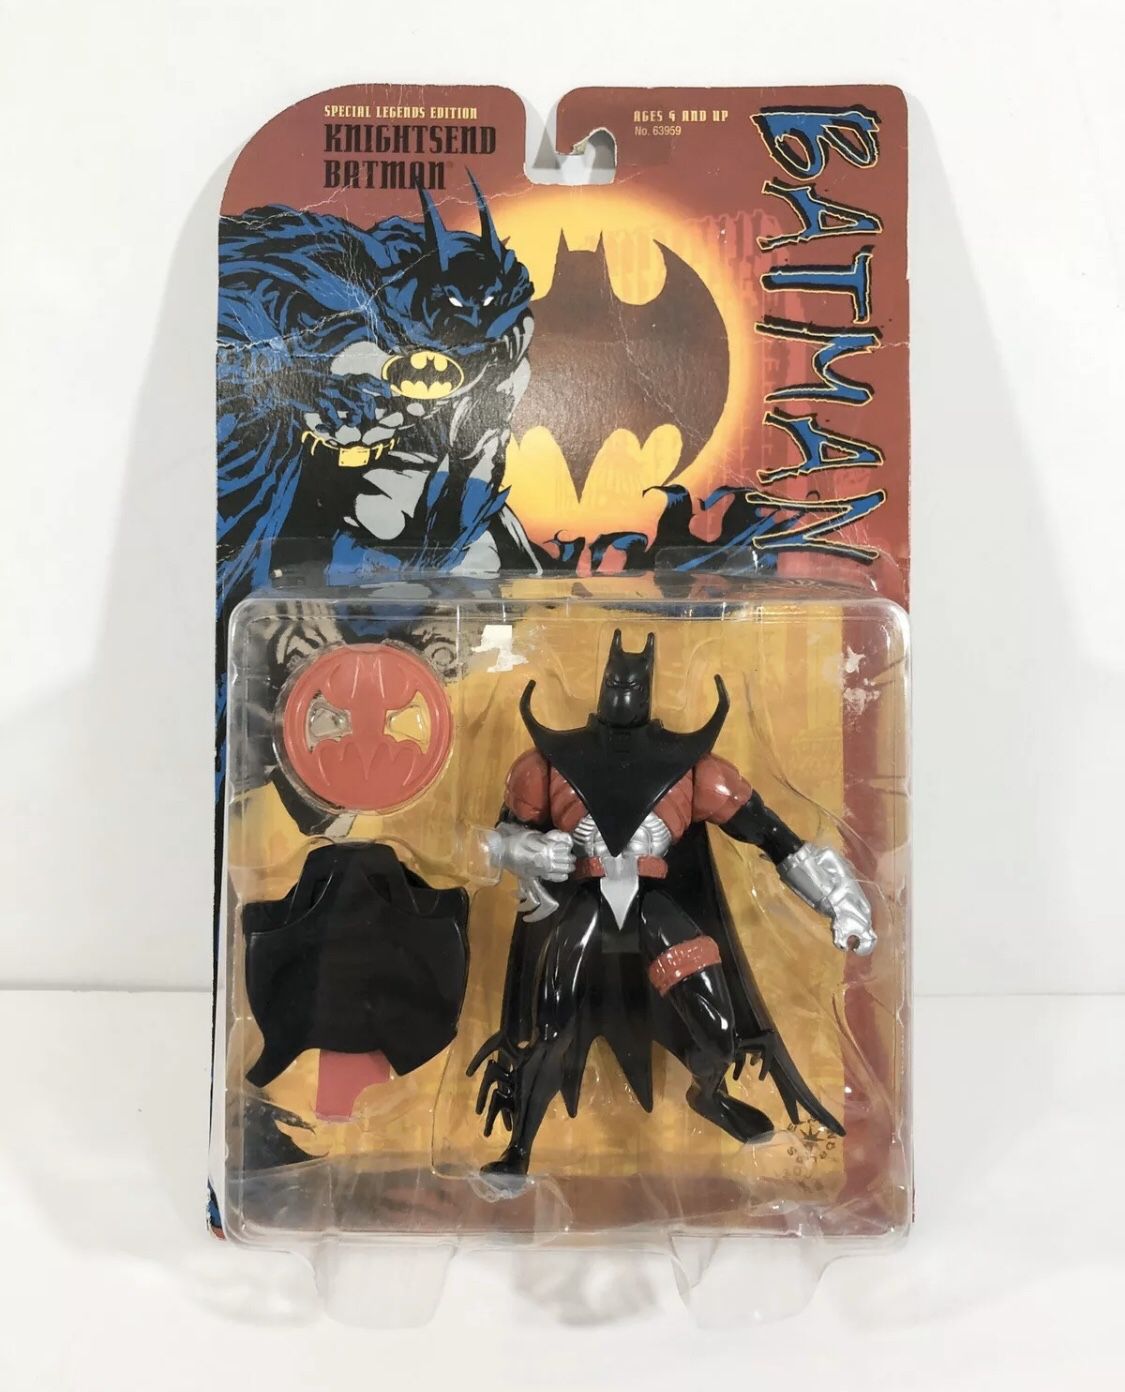 1995 Special Legends Edition Knightsend Batman KENNER Action Figure